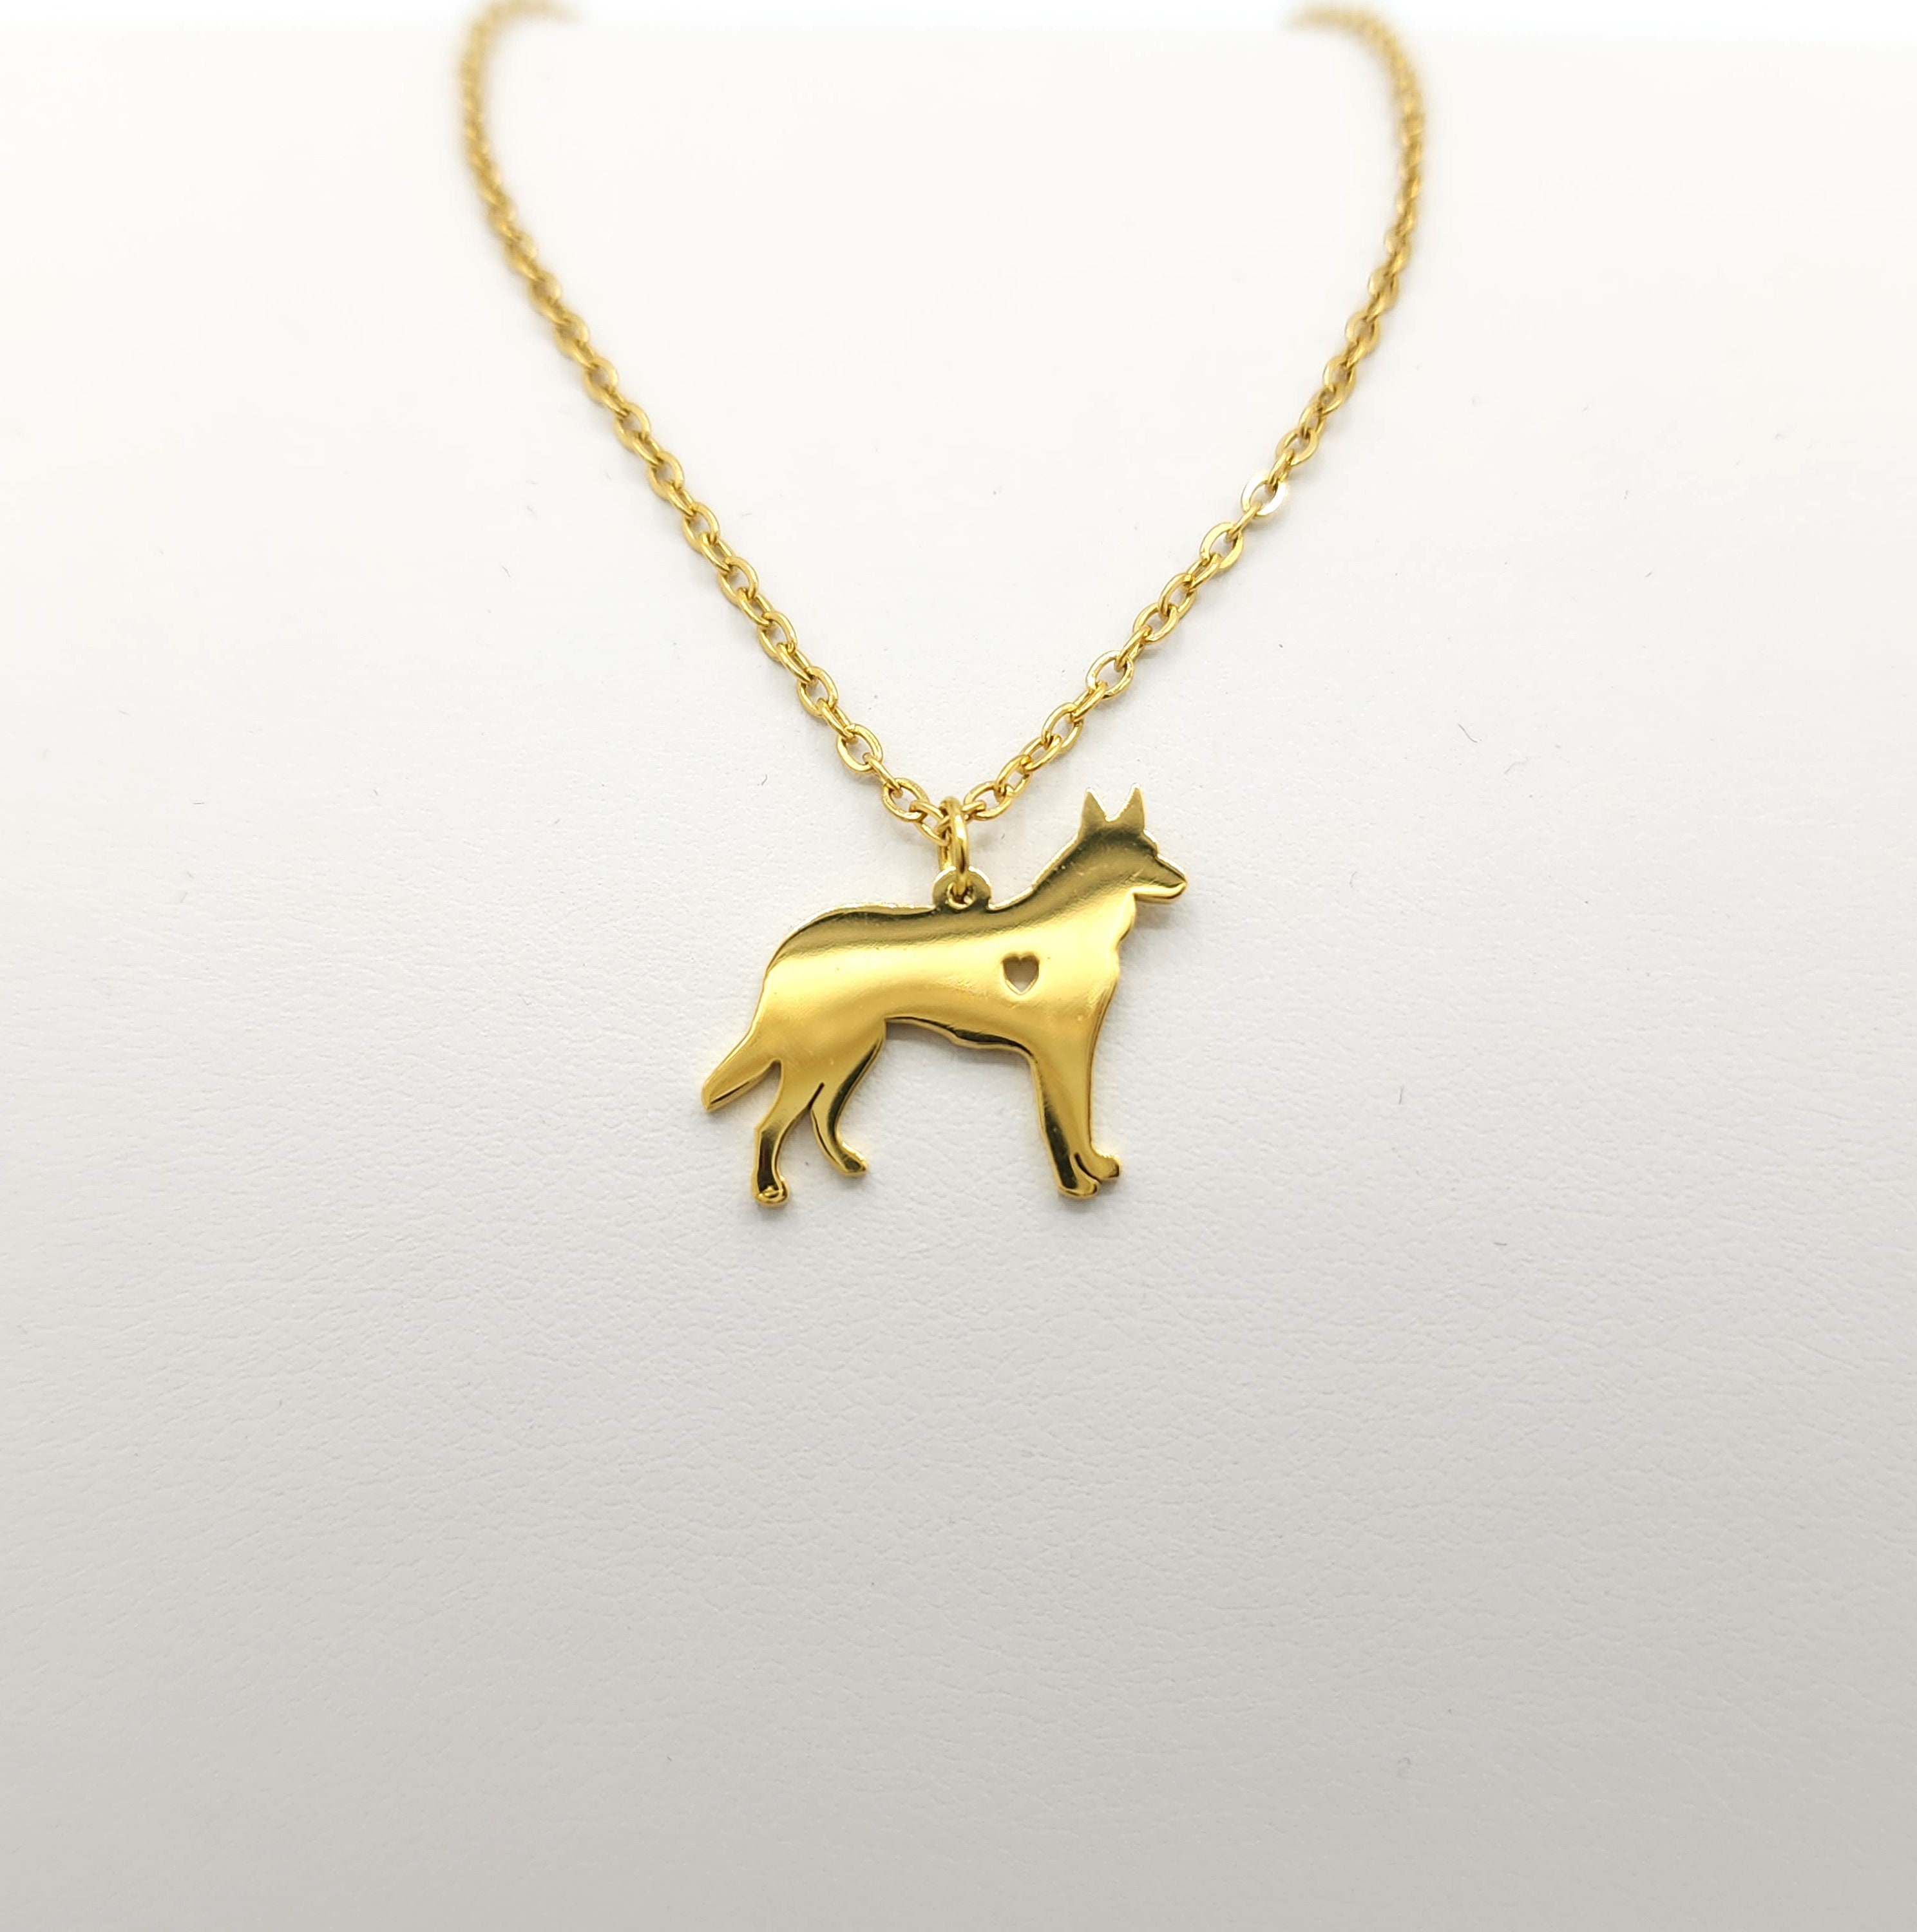 Gold & Silver German Shepherd Necklace Dog Jewelry Breed Pet Gifts Dog  Memorial Gift New Puppy Doggy Rescue For Lovers From Dingding64985, $2.2 |  DHgate.Com